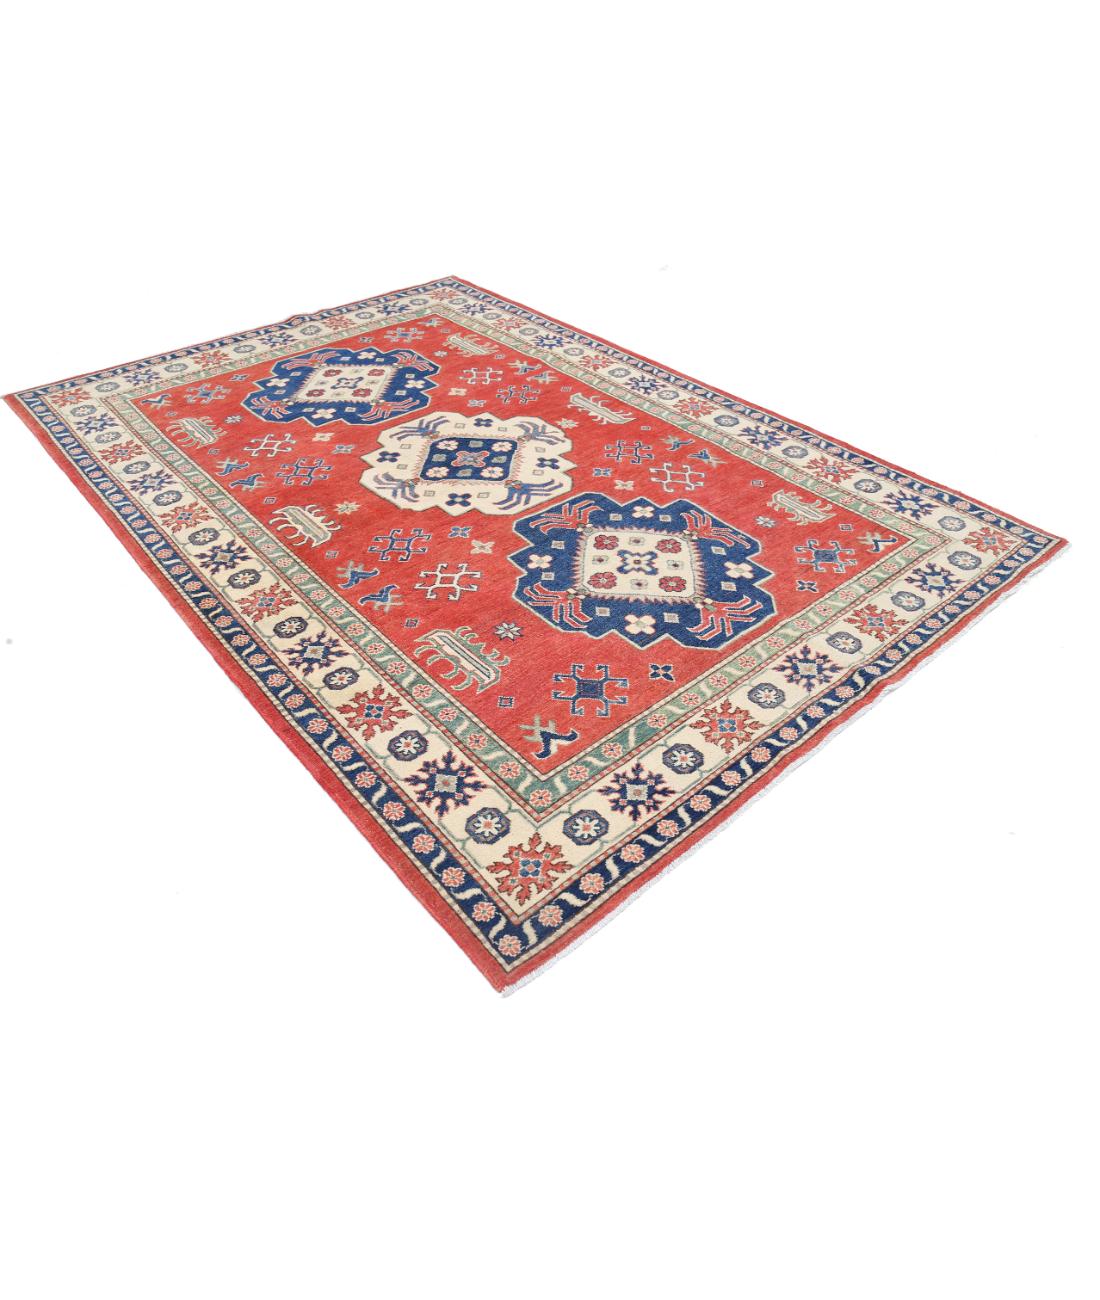 Hand Knotted Tribal Kazak Wool Rug - 6'7'' x 9'4'' 6' 7" X 9' 4" (201 X 284) / Red / Ivory